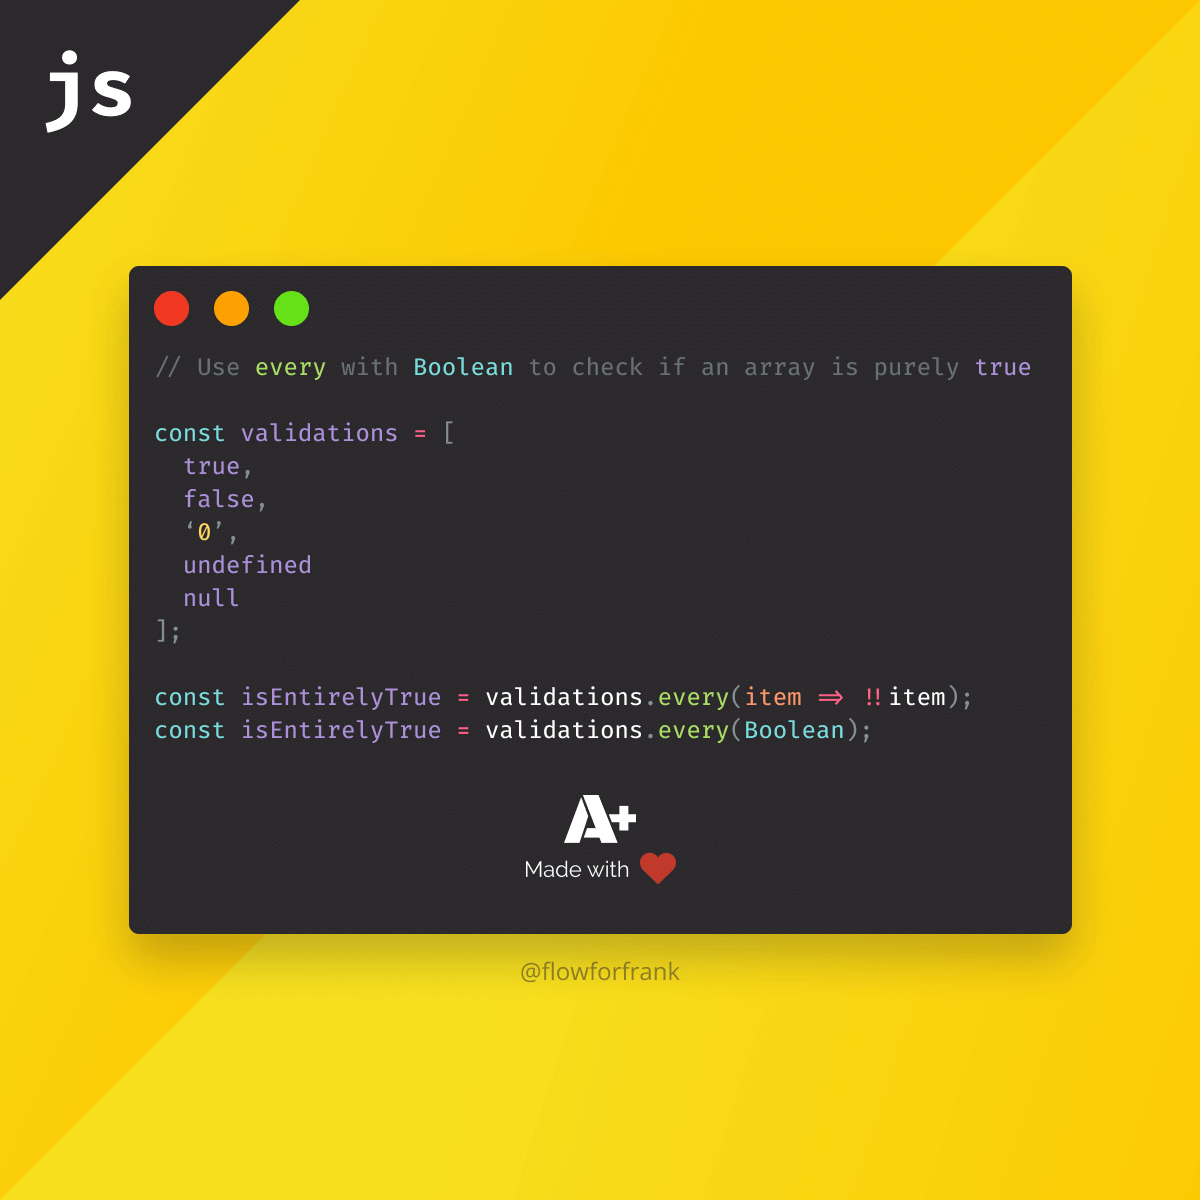 How to Check if All Values are True in a JavaScript Array